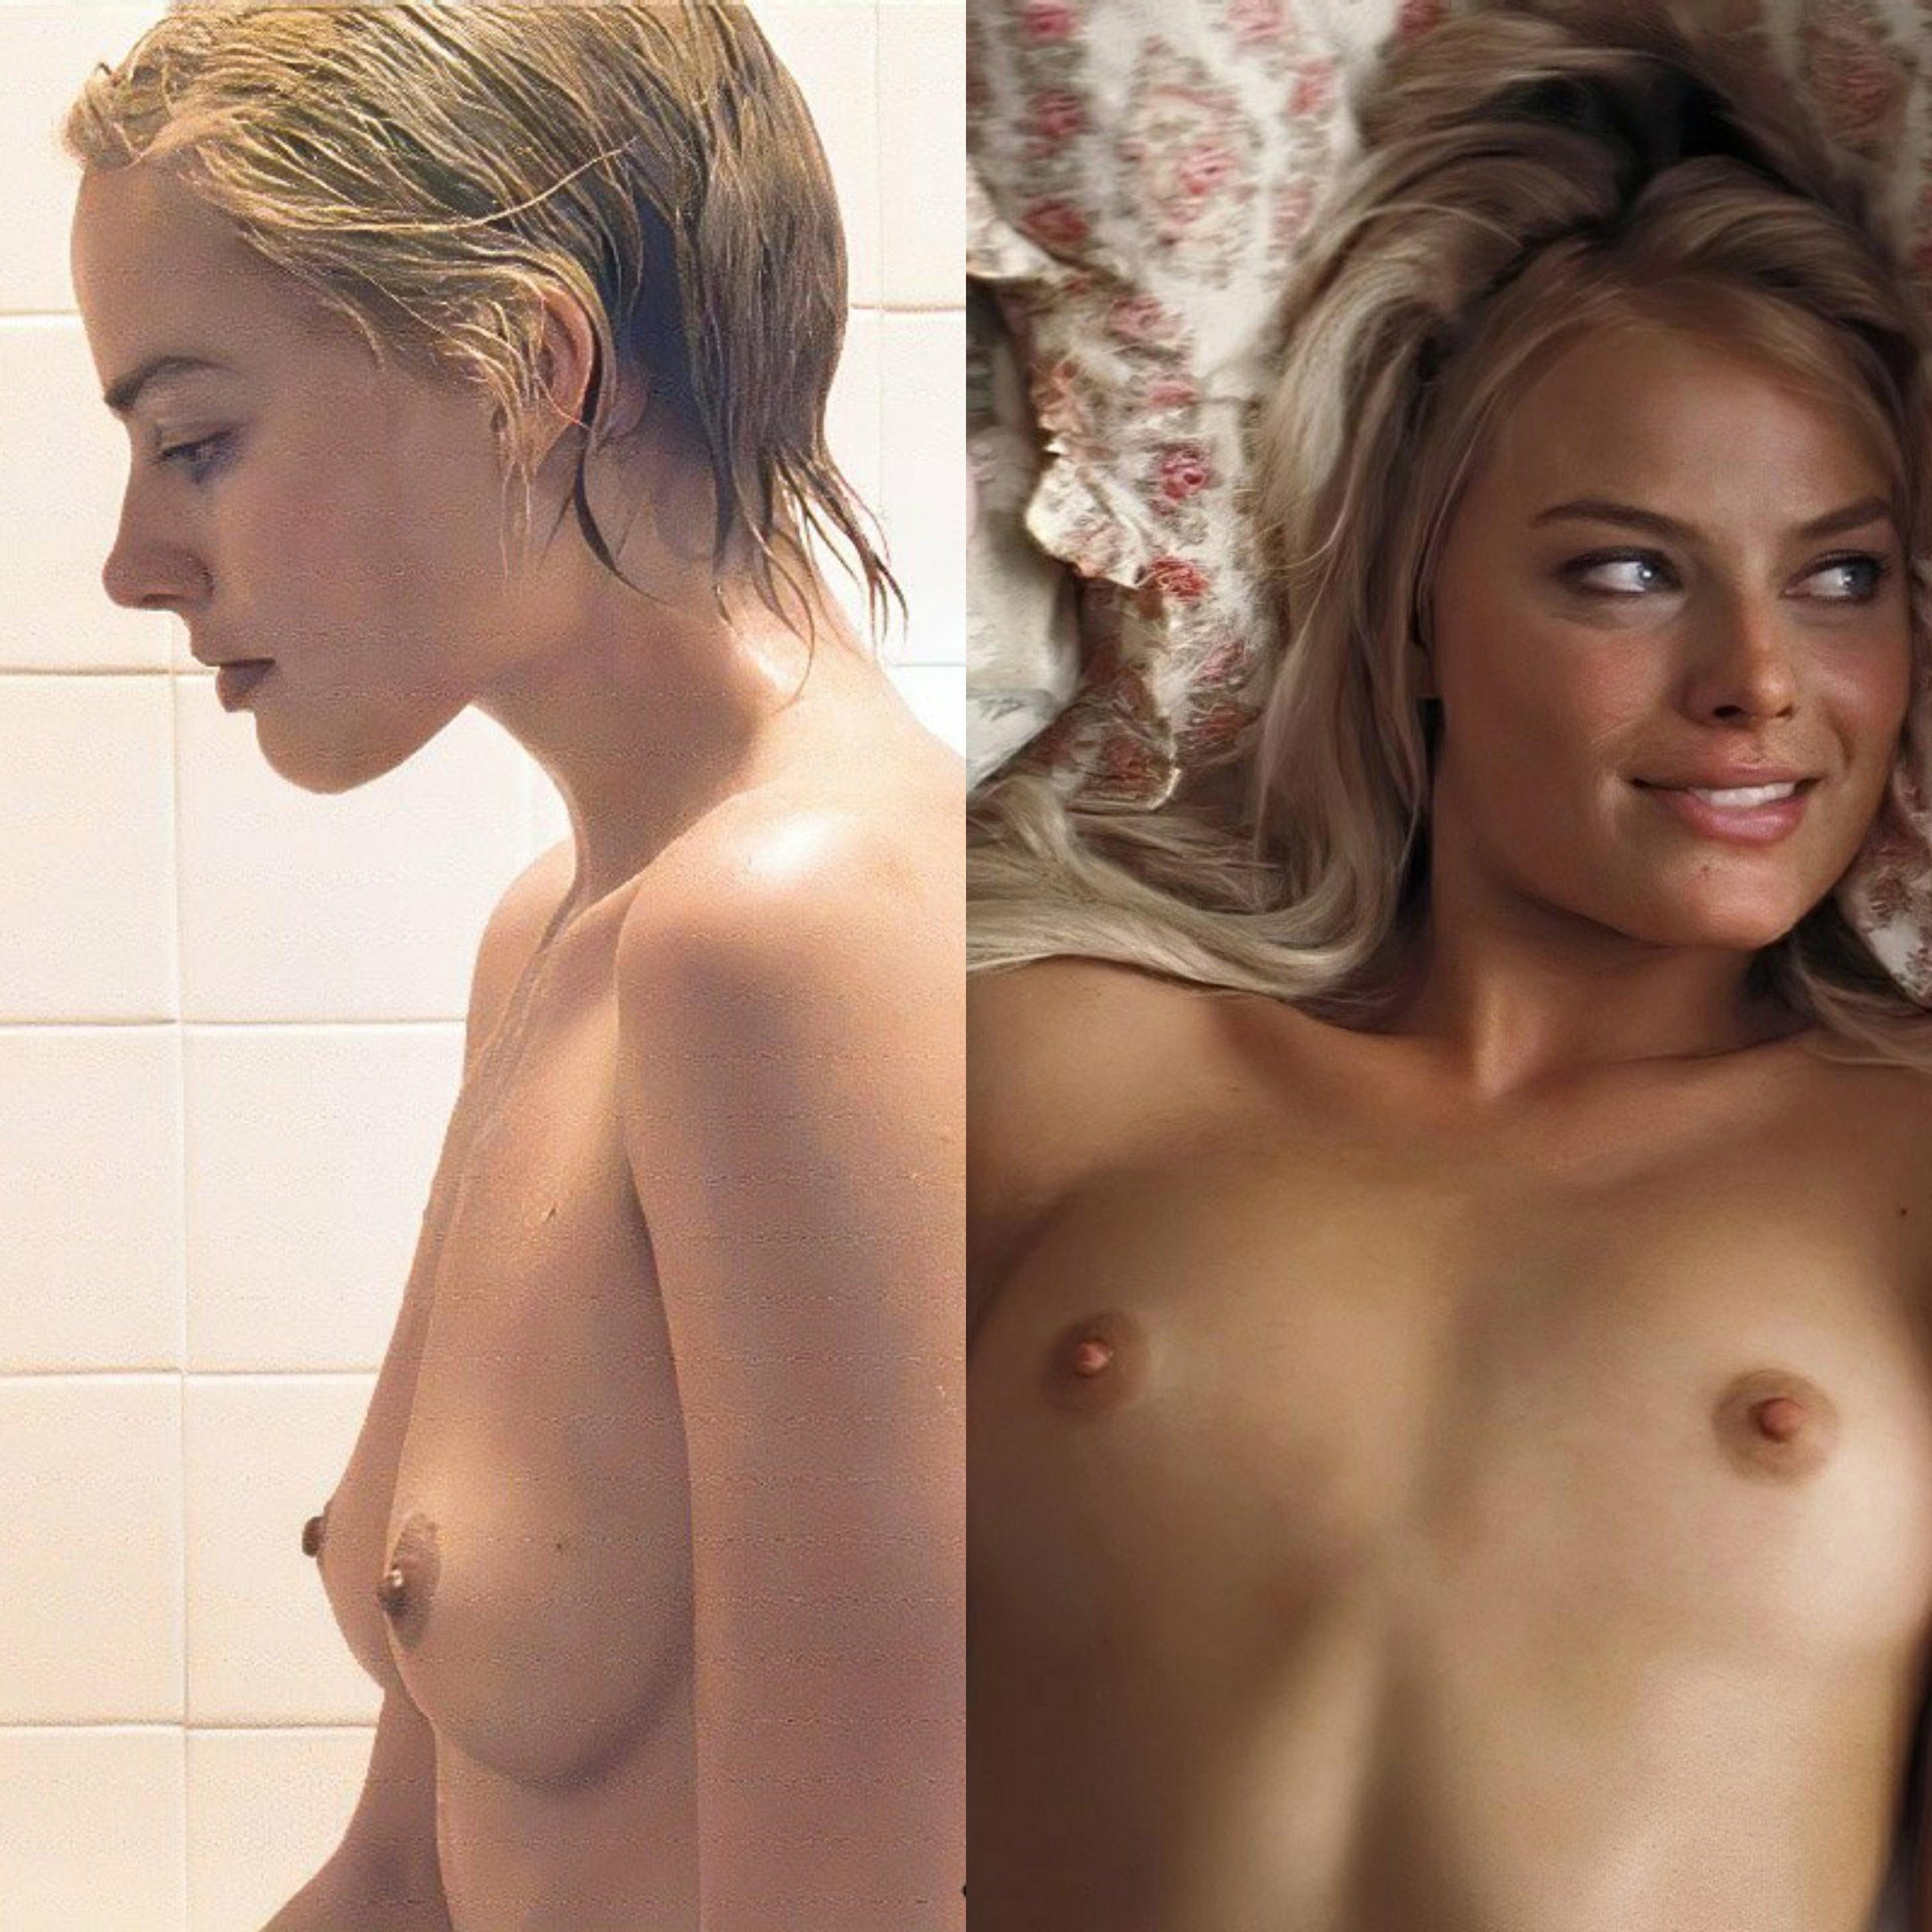 carol simms add margot robbie naked pictures photo